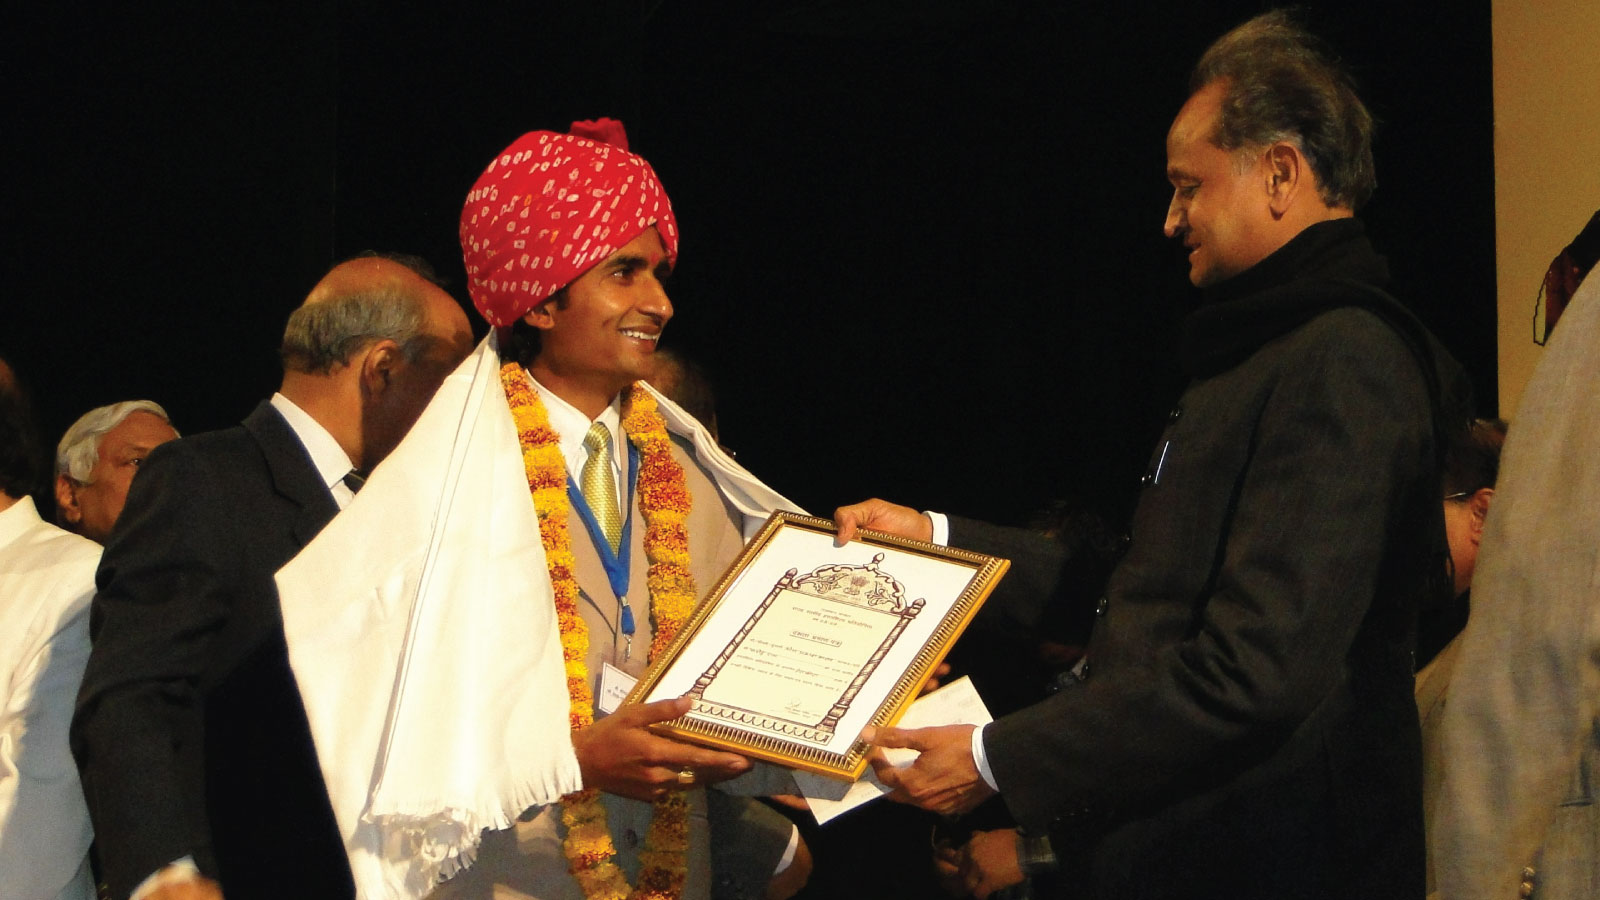 UNESCO Award of Excellence for Handicrafts 2012